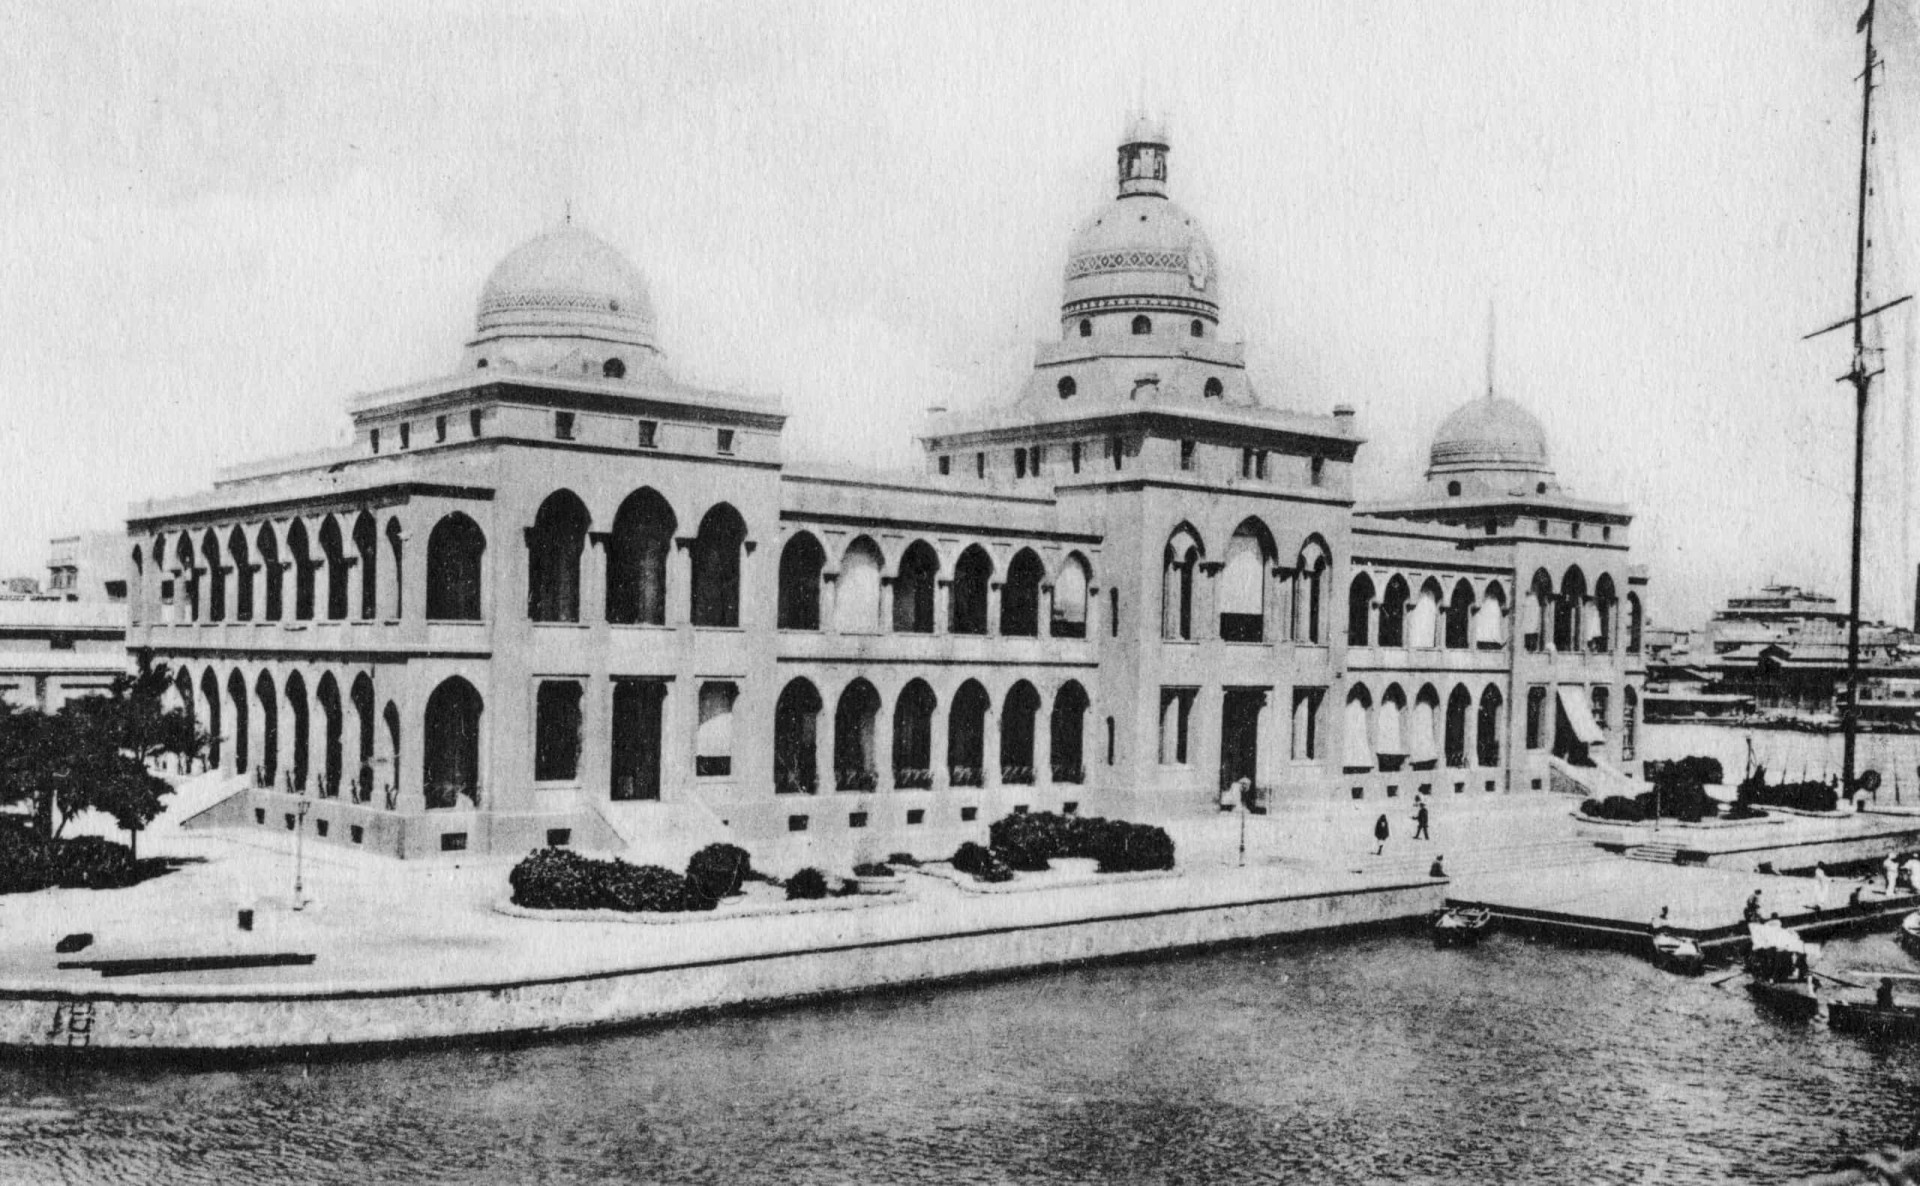 <p>The grandiose headquarters of the Suez Canal Company in Port Said were built in 1893, and today house the administration offices of the Suez Canal Authority. The Authority's head office, however, is located in Ismailia.</p><p>You may also like:<a href="https://www.starsinsider.com/n/355860?utm_source=msn.com&utm_medium=display&utm_campaign=referral_description&utm_content=455090v9en-en_selected"> Secret code words you're not supposed to know</a></p>